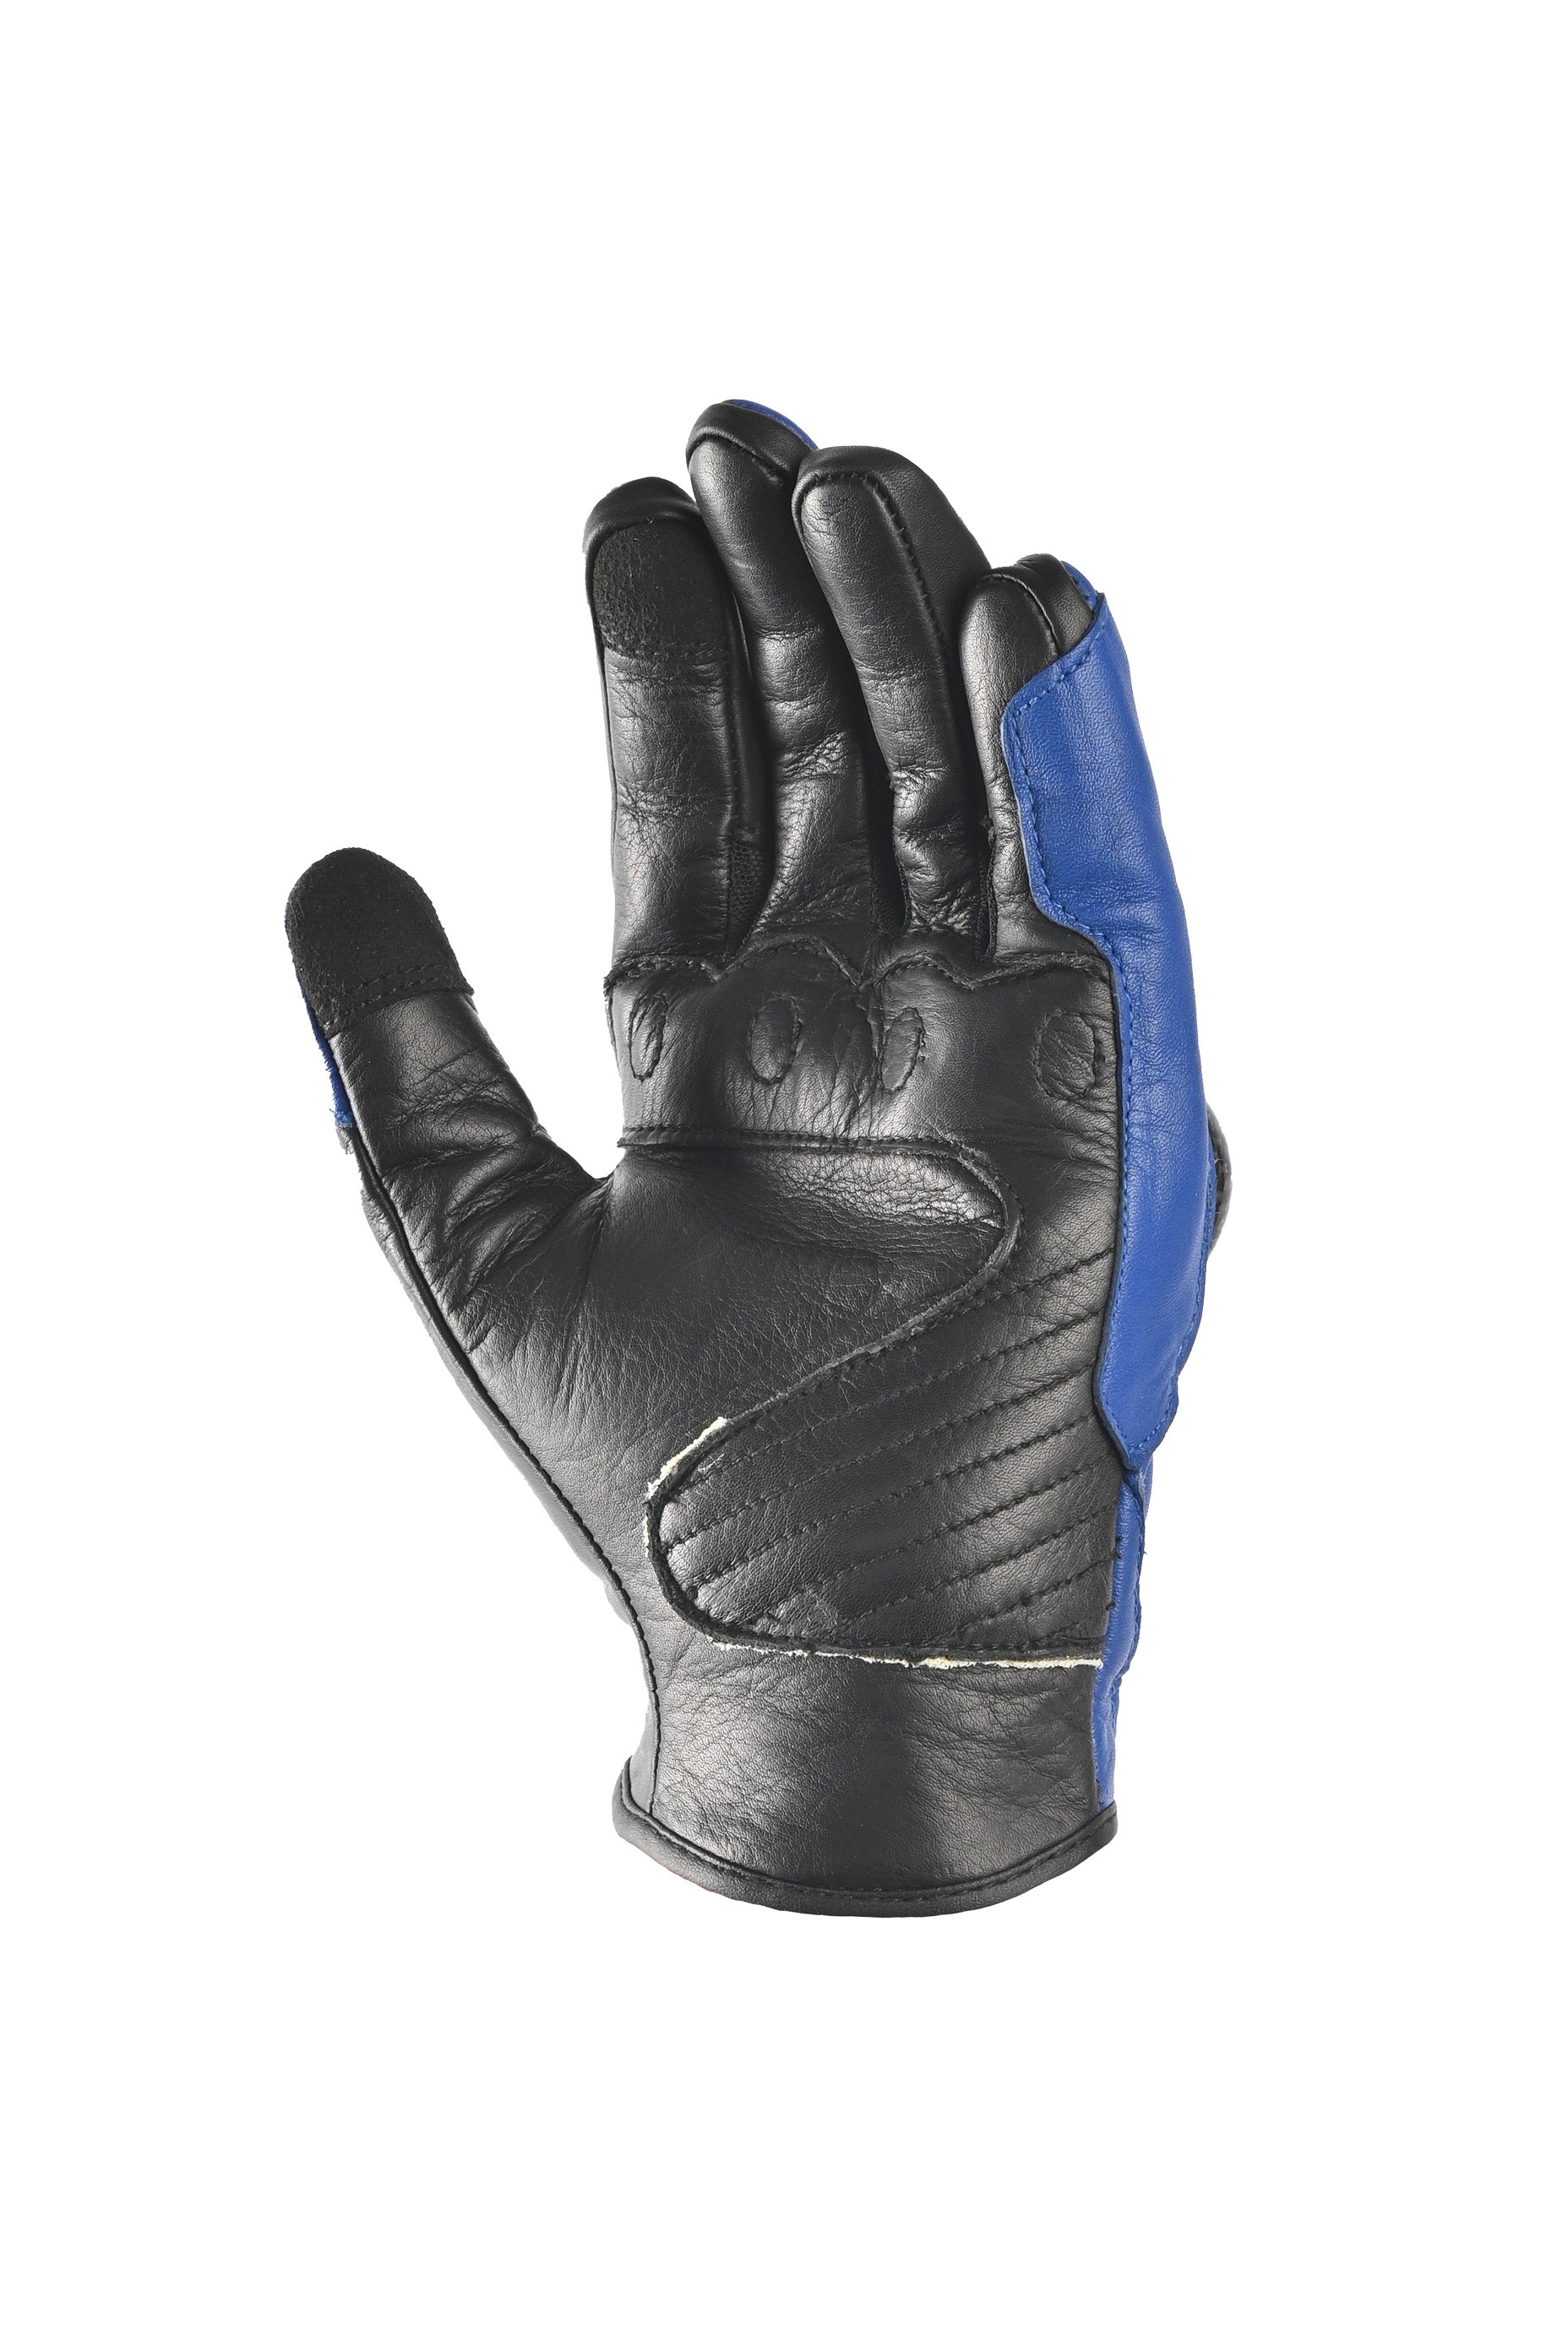 r-tech falcon black and blue gloves front side view